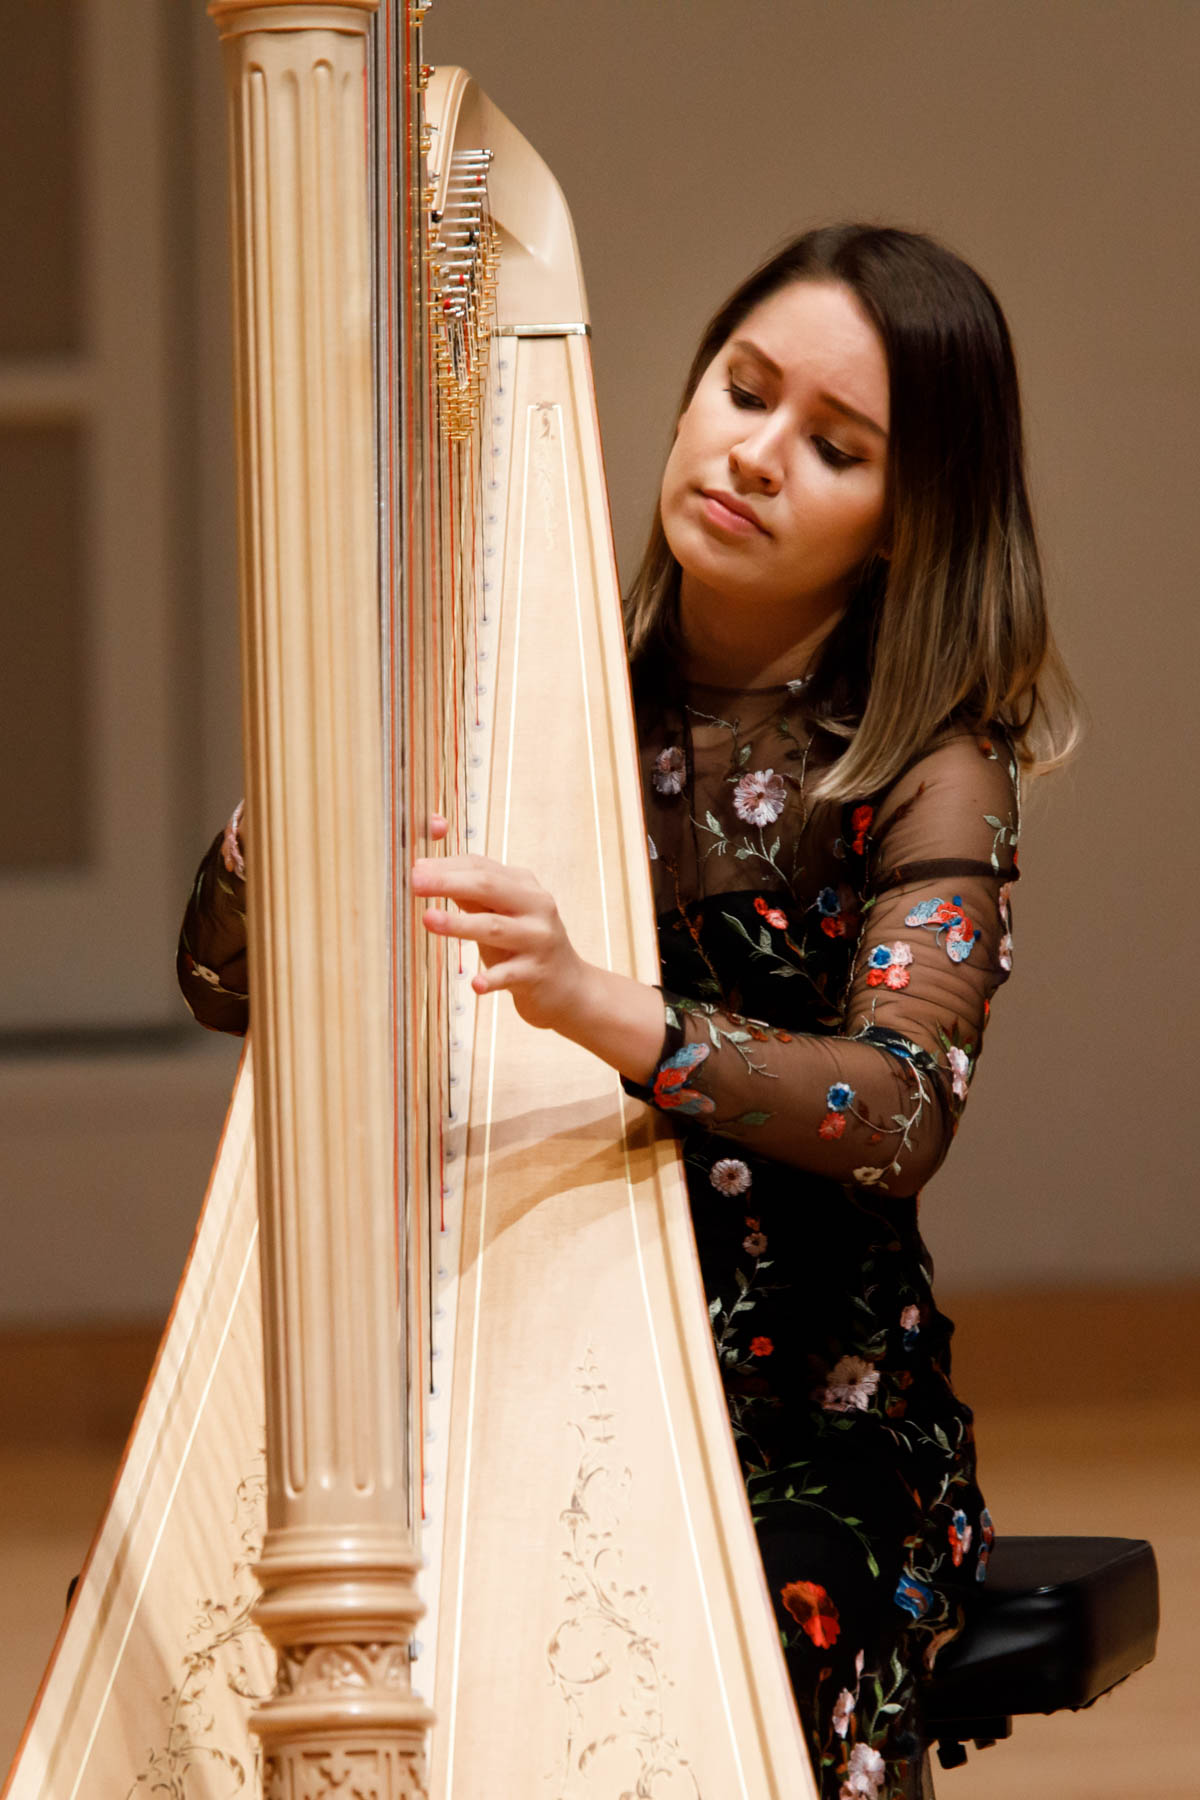 Harpist Katherine Siochi performs during her laureate recital at the 11th USA International Harp Competition at Indiana University in Bloomington, Indiana on Friday, July 5, 2019. (Photo by James Brosher)